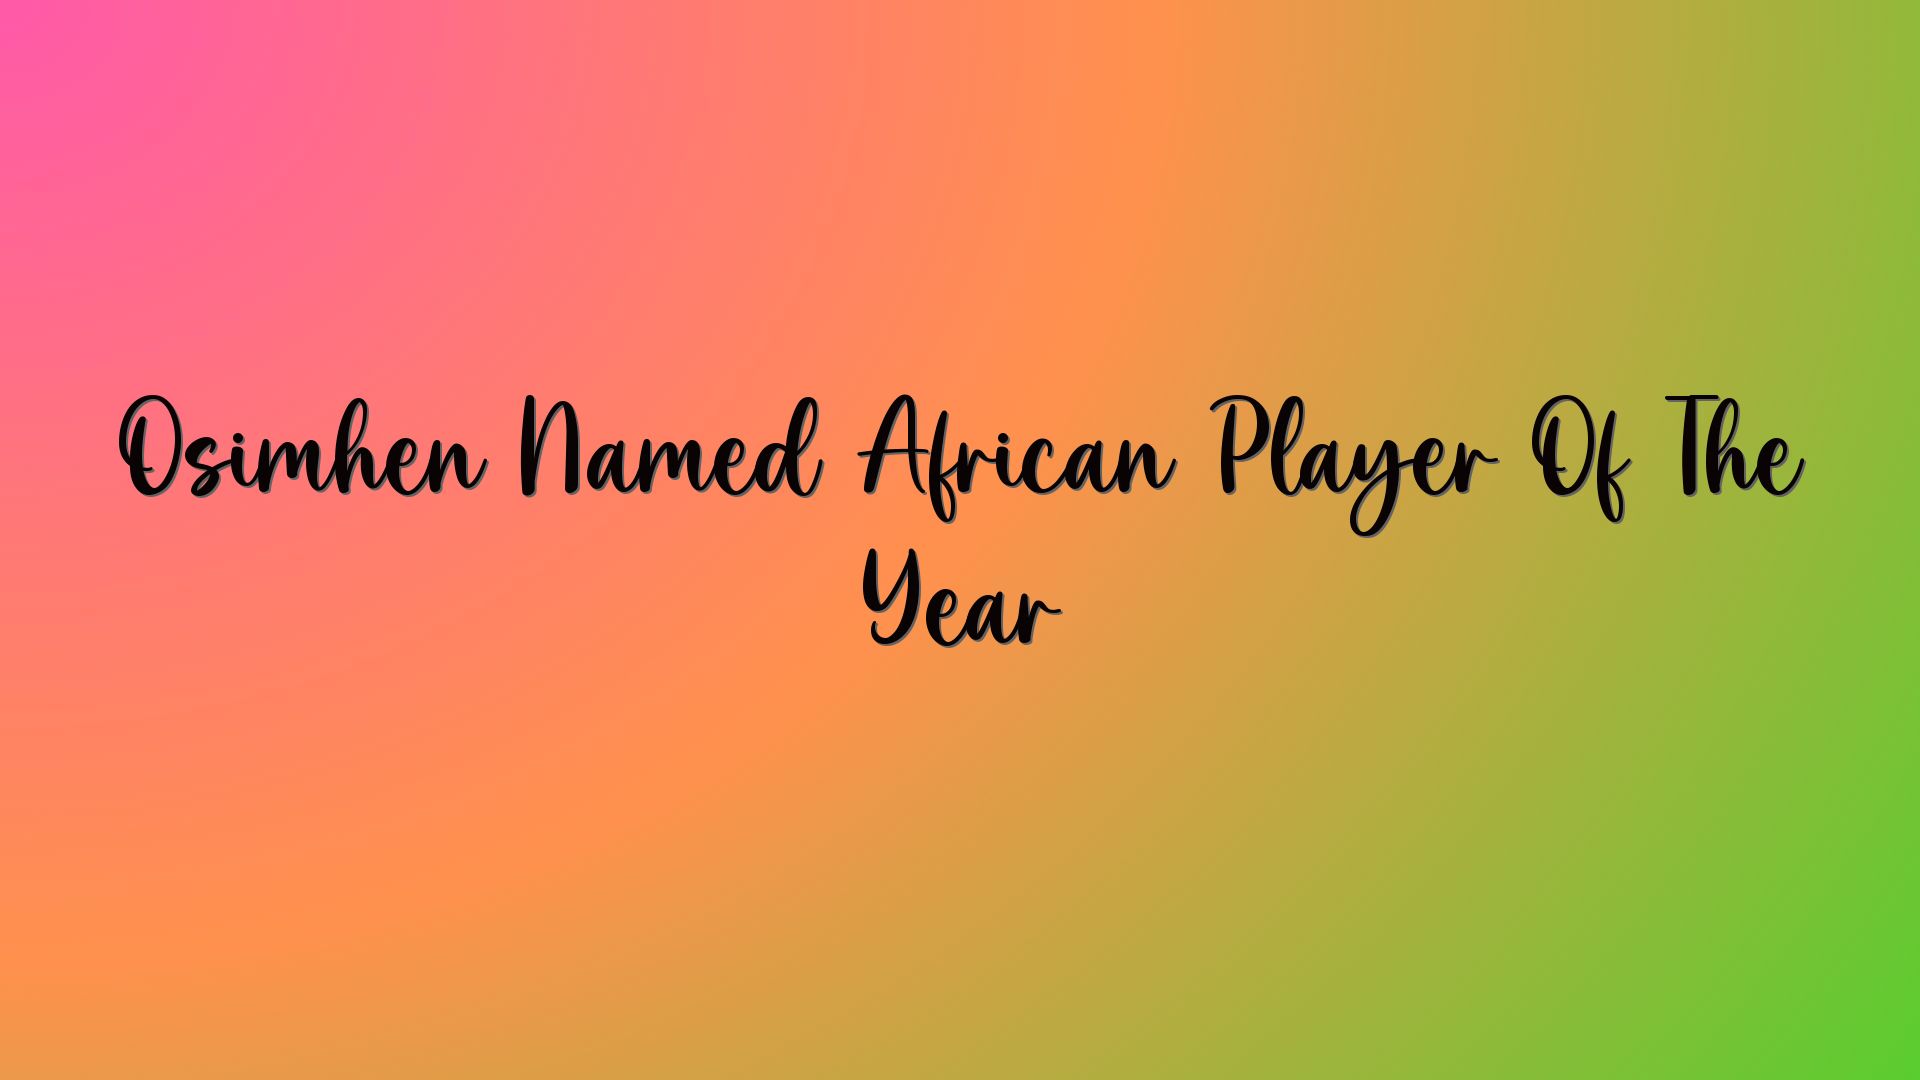 Osimhen Named African Player Of The Year